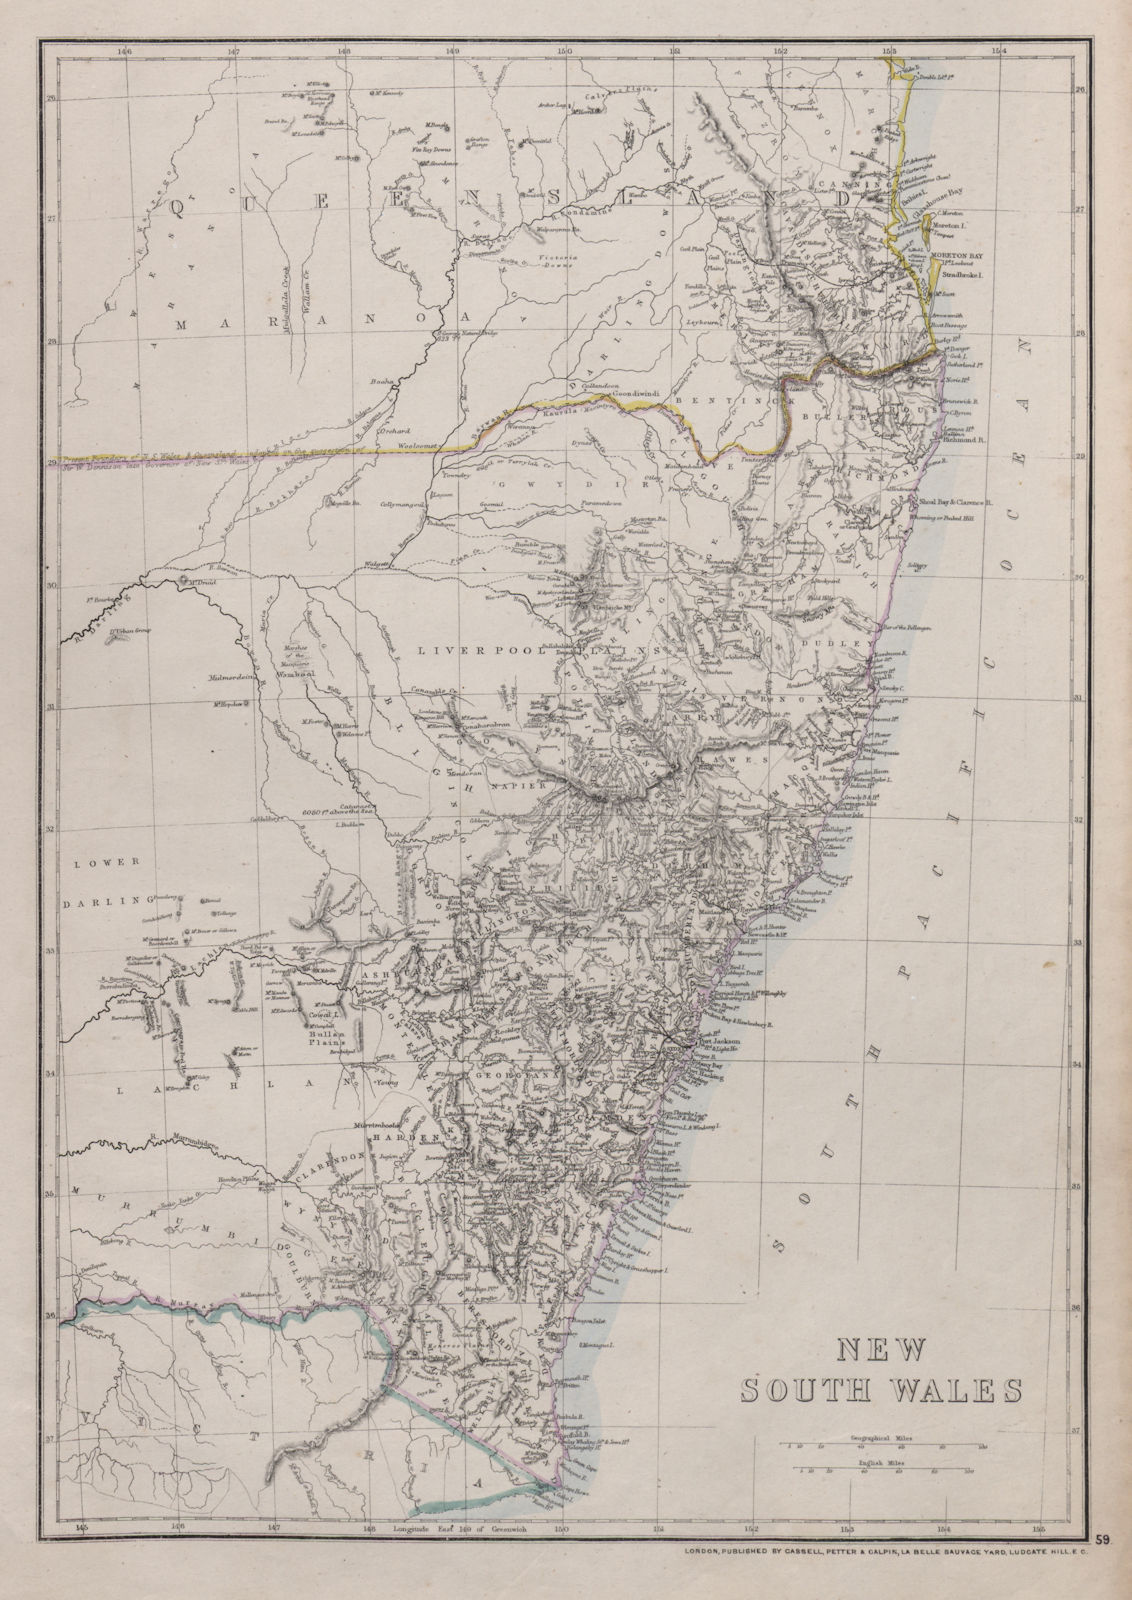 NEW SOUTH WALES boundary adopted on the suggestion of W Dennison WELLER 1868 map